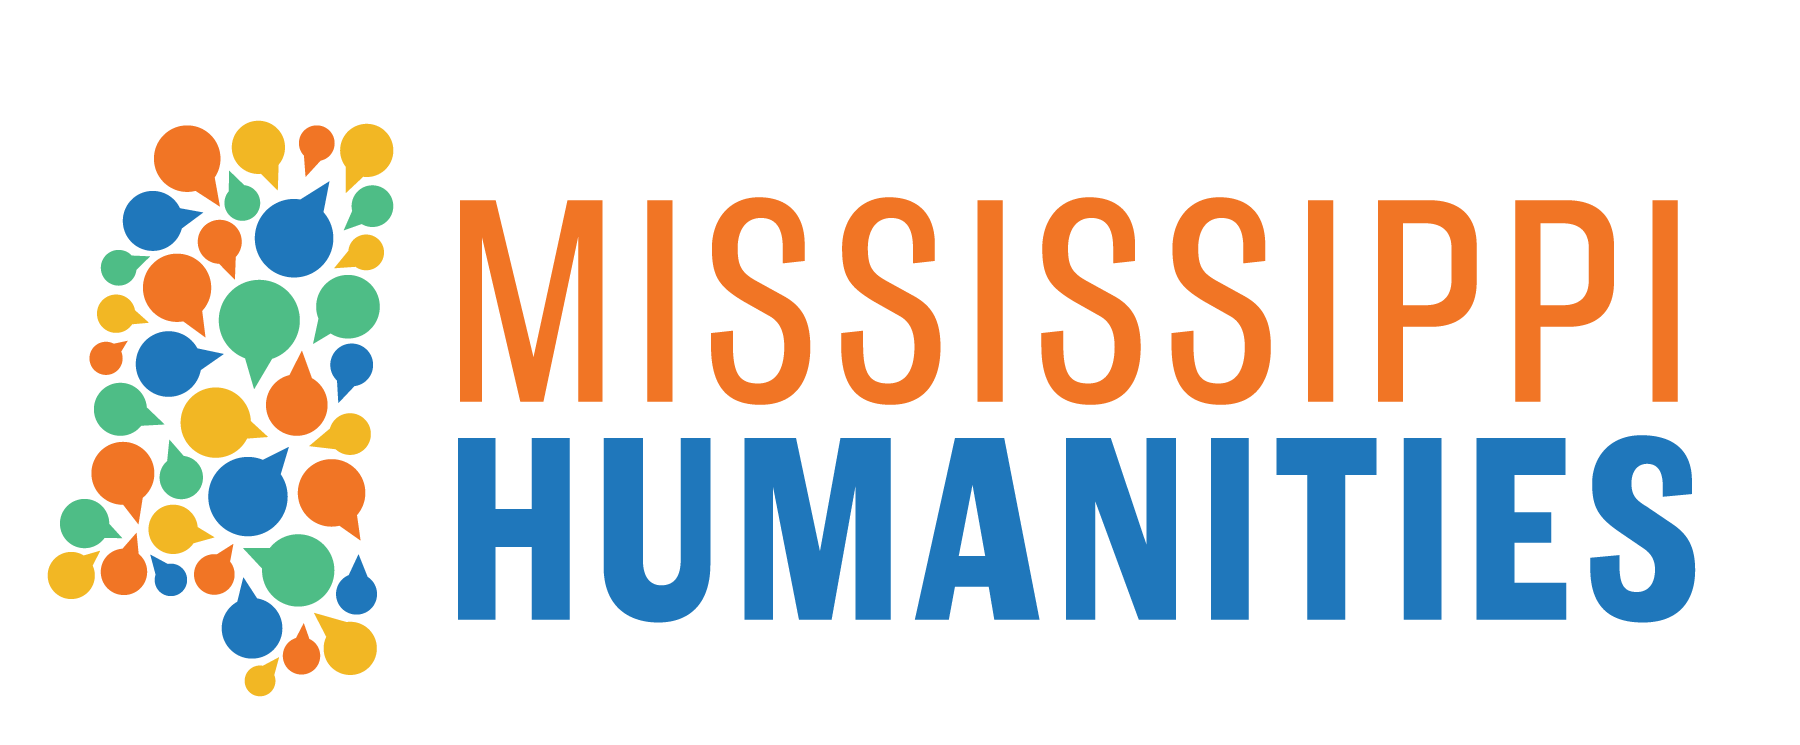 Mississippi Humanities Council logo